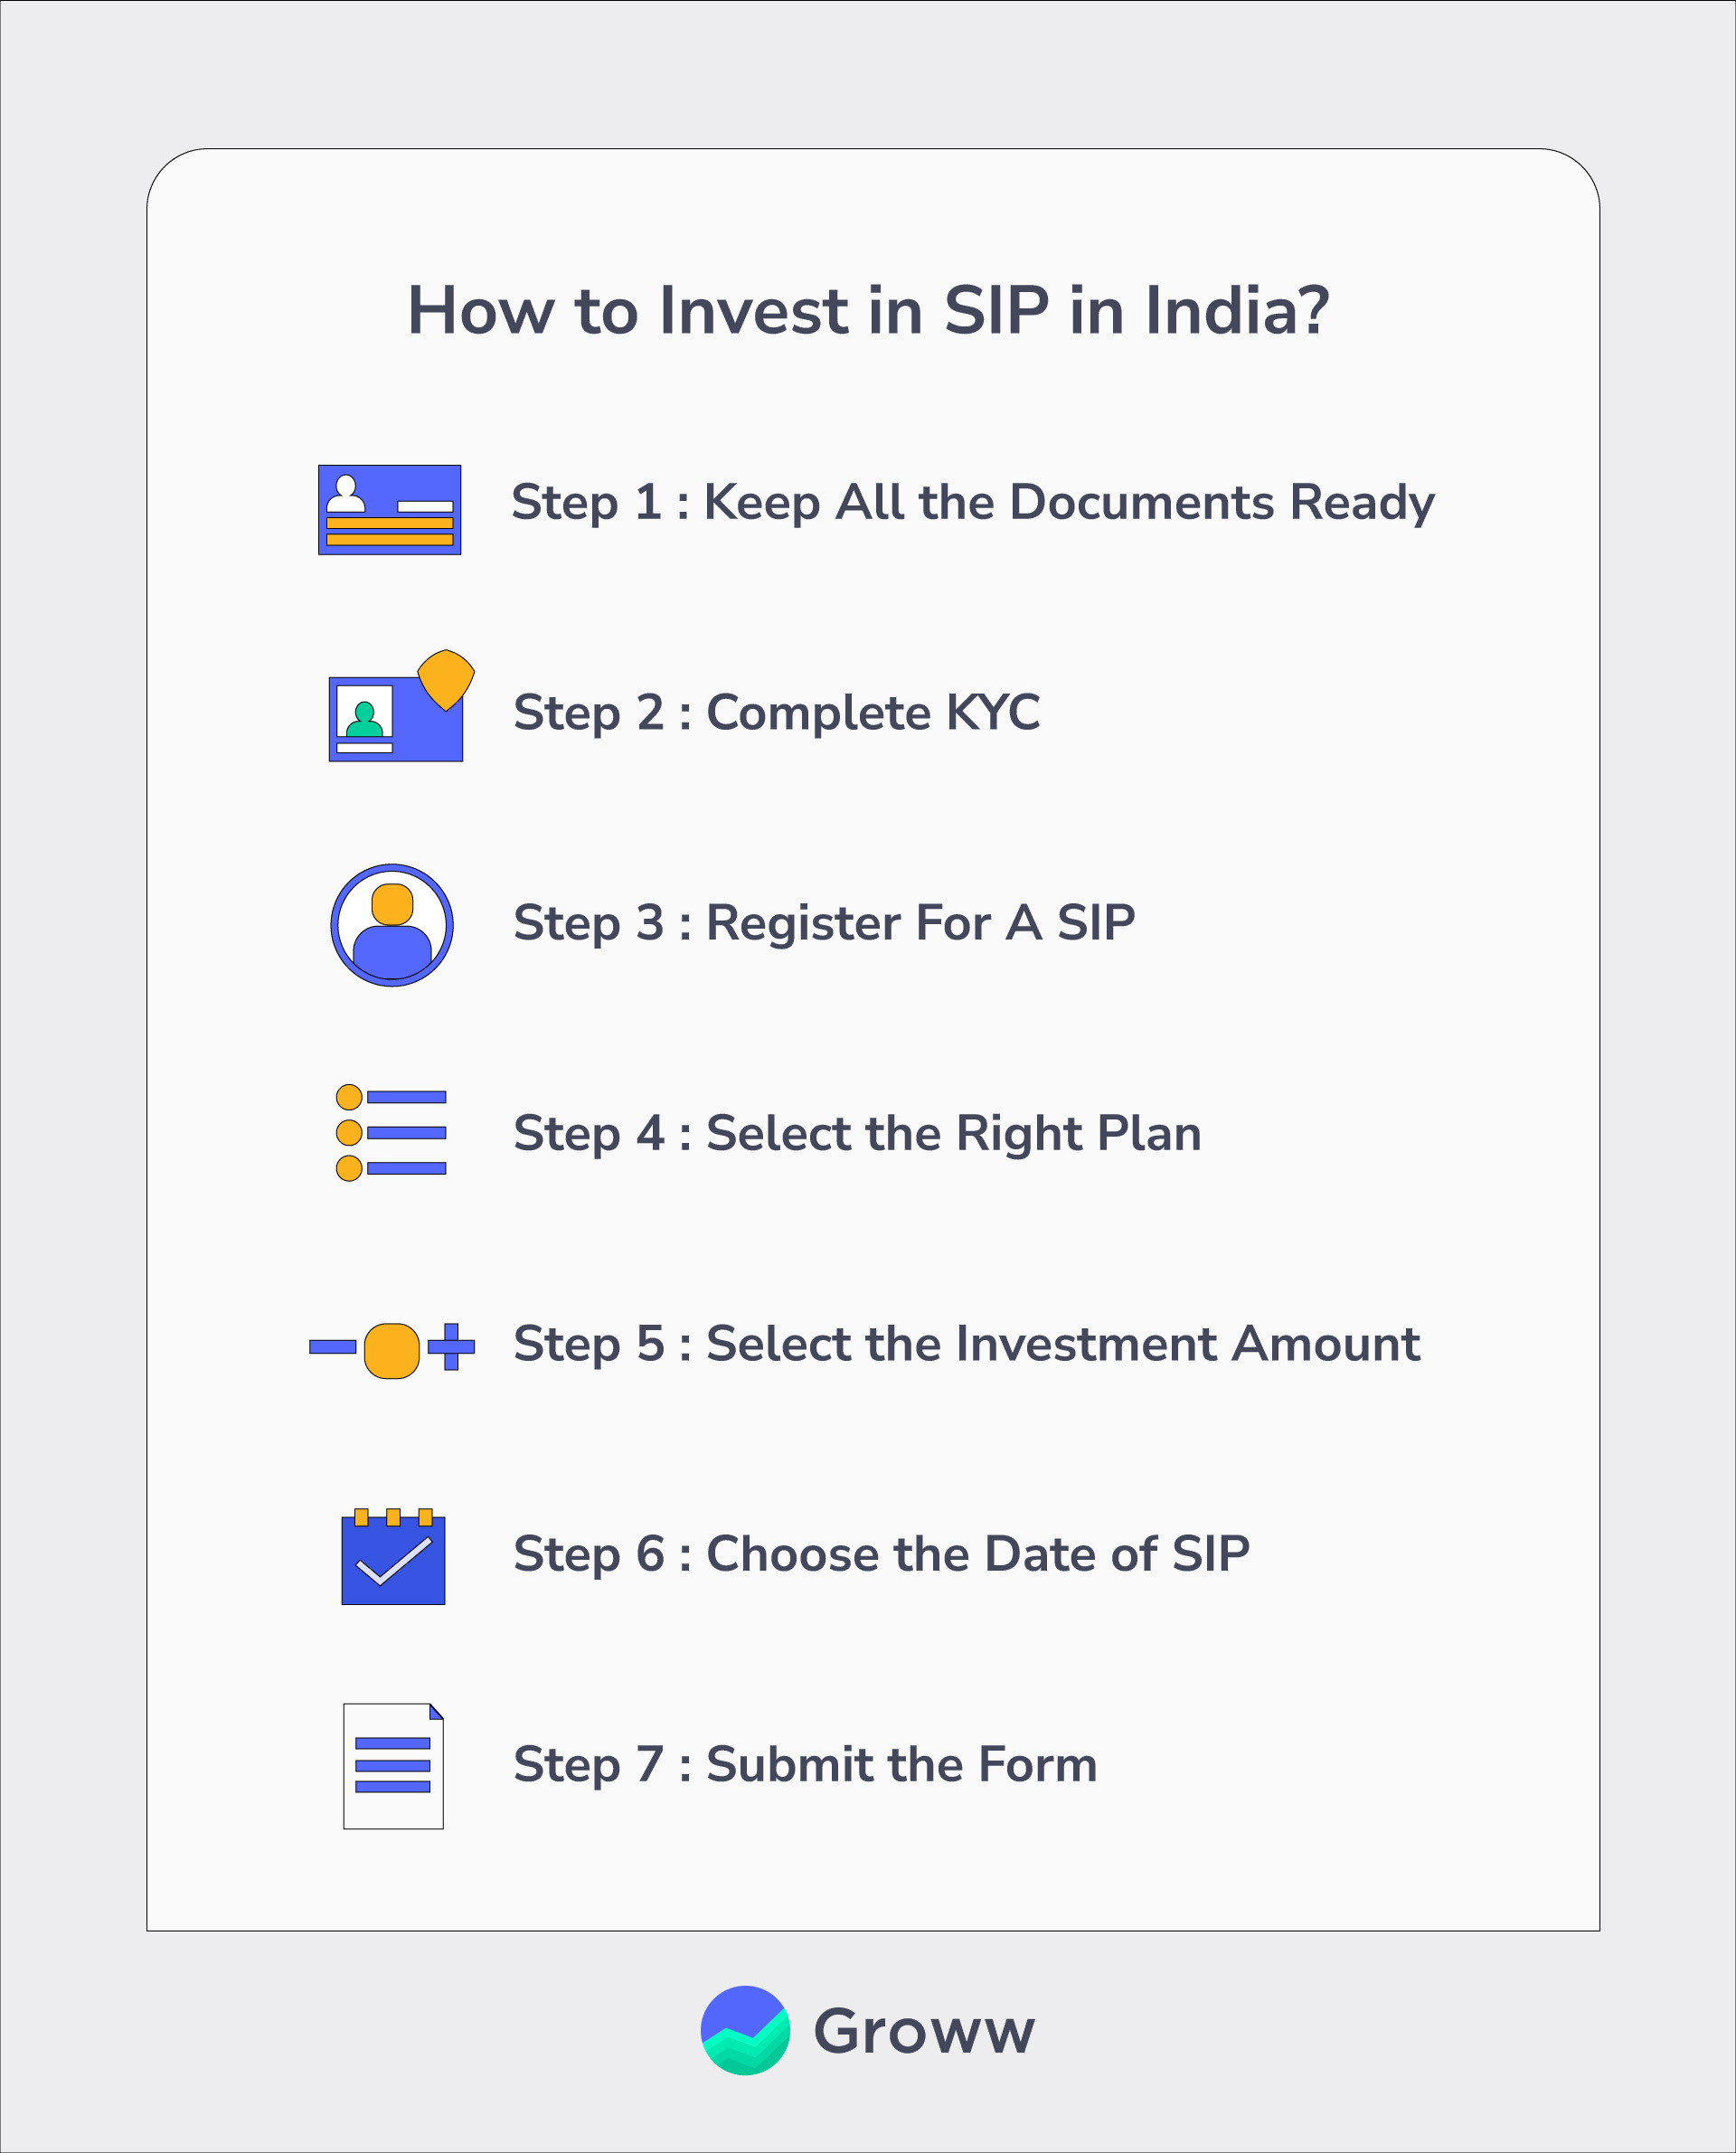 How to Invest in SIP in India